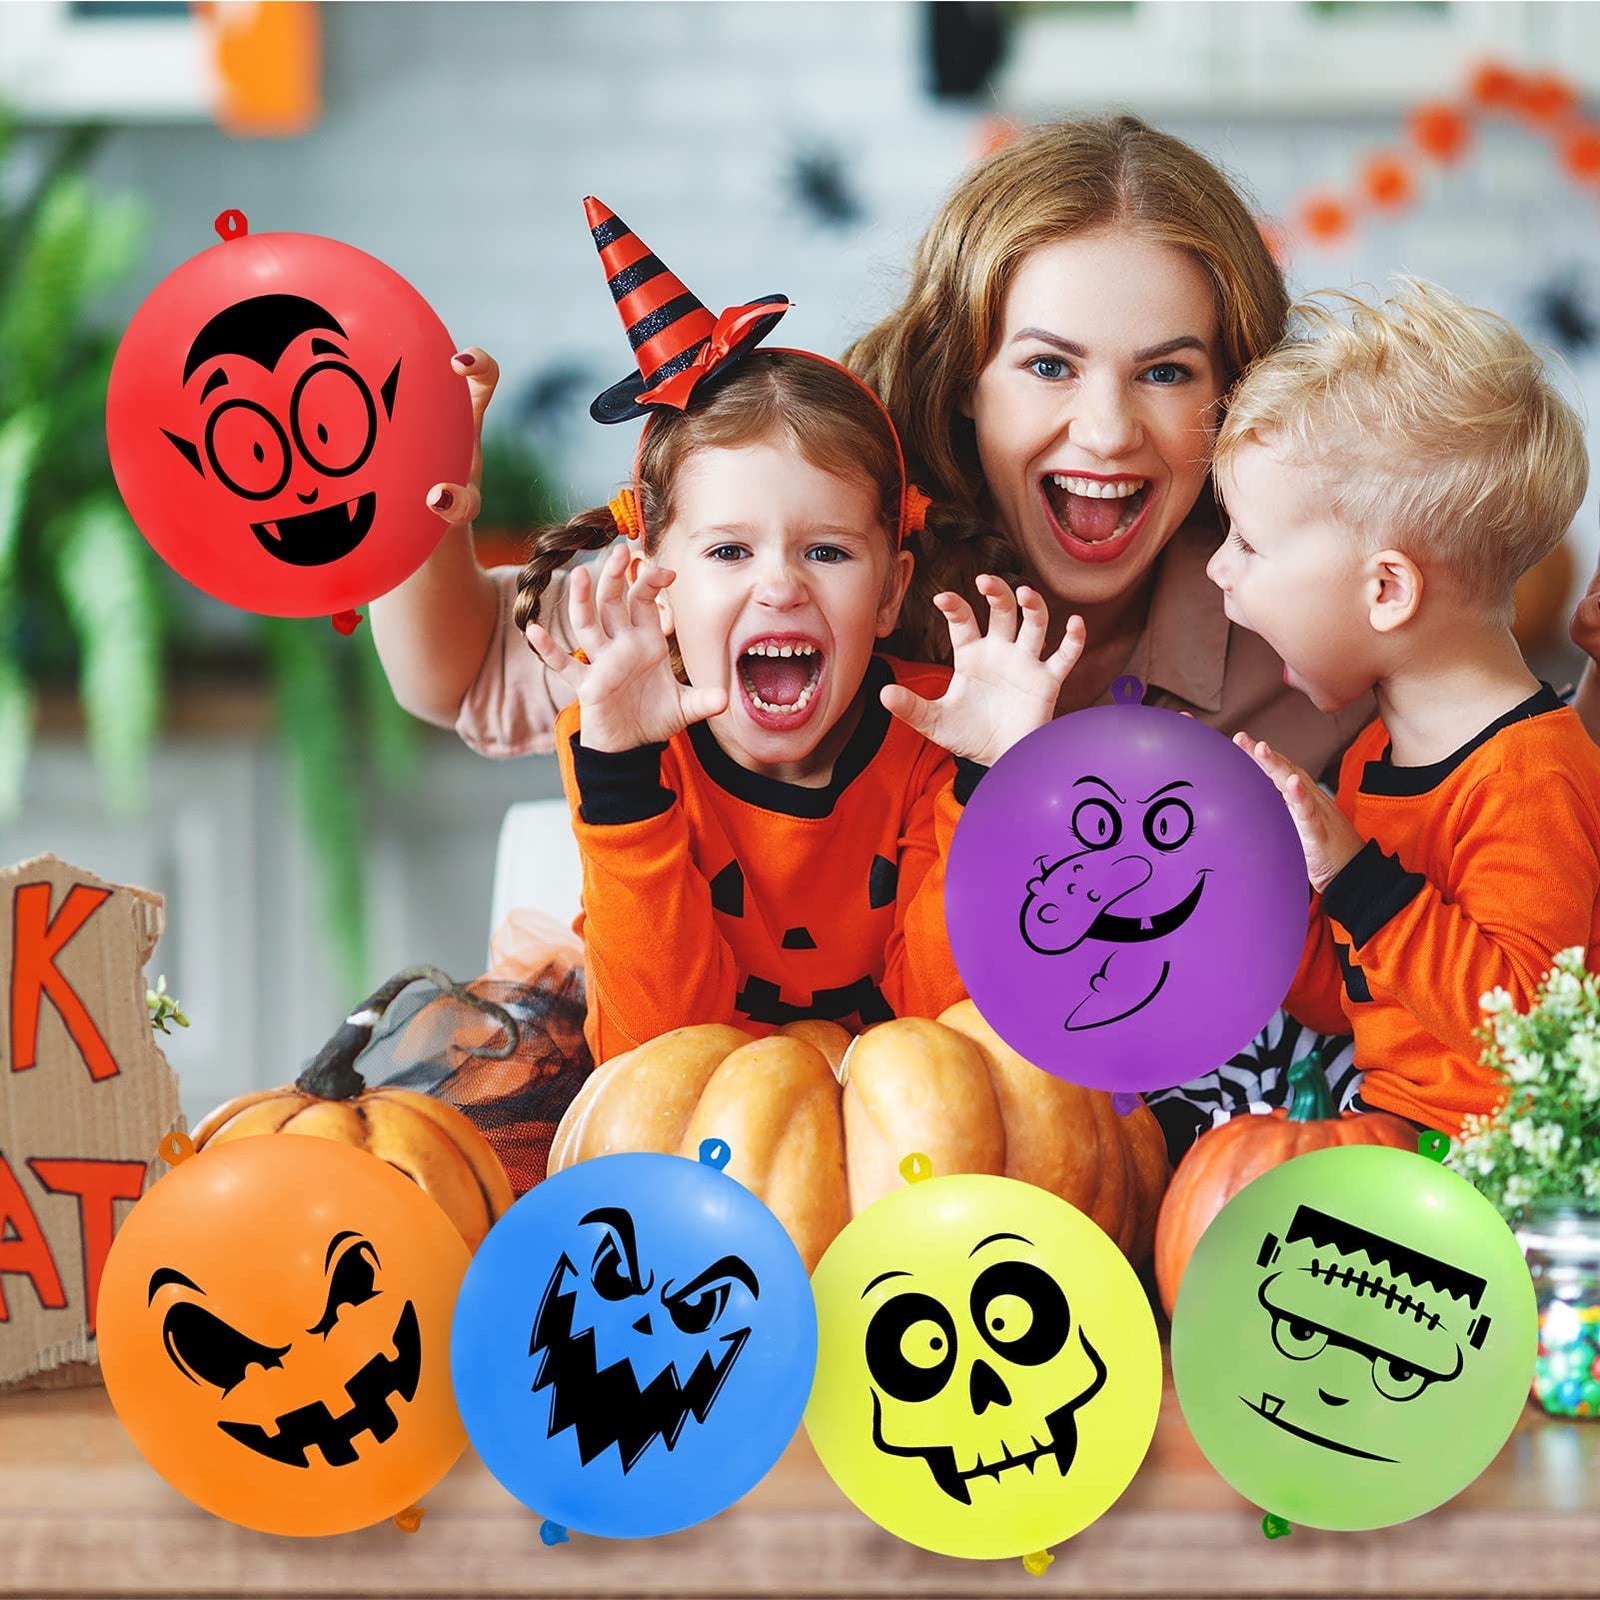 36 PCS Halloween Punch Balloons for Kids Halloween Favors Party Game Decoration Supplies, Halloween Balloons for Halloween Prize Game Rewards, Trick or Treat Toys, School Classroom Game